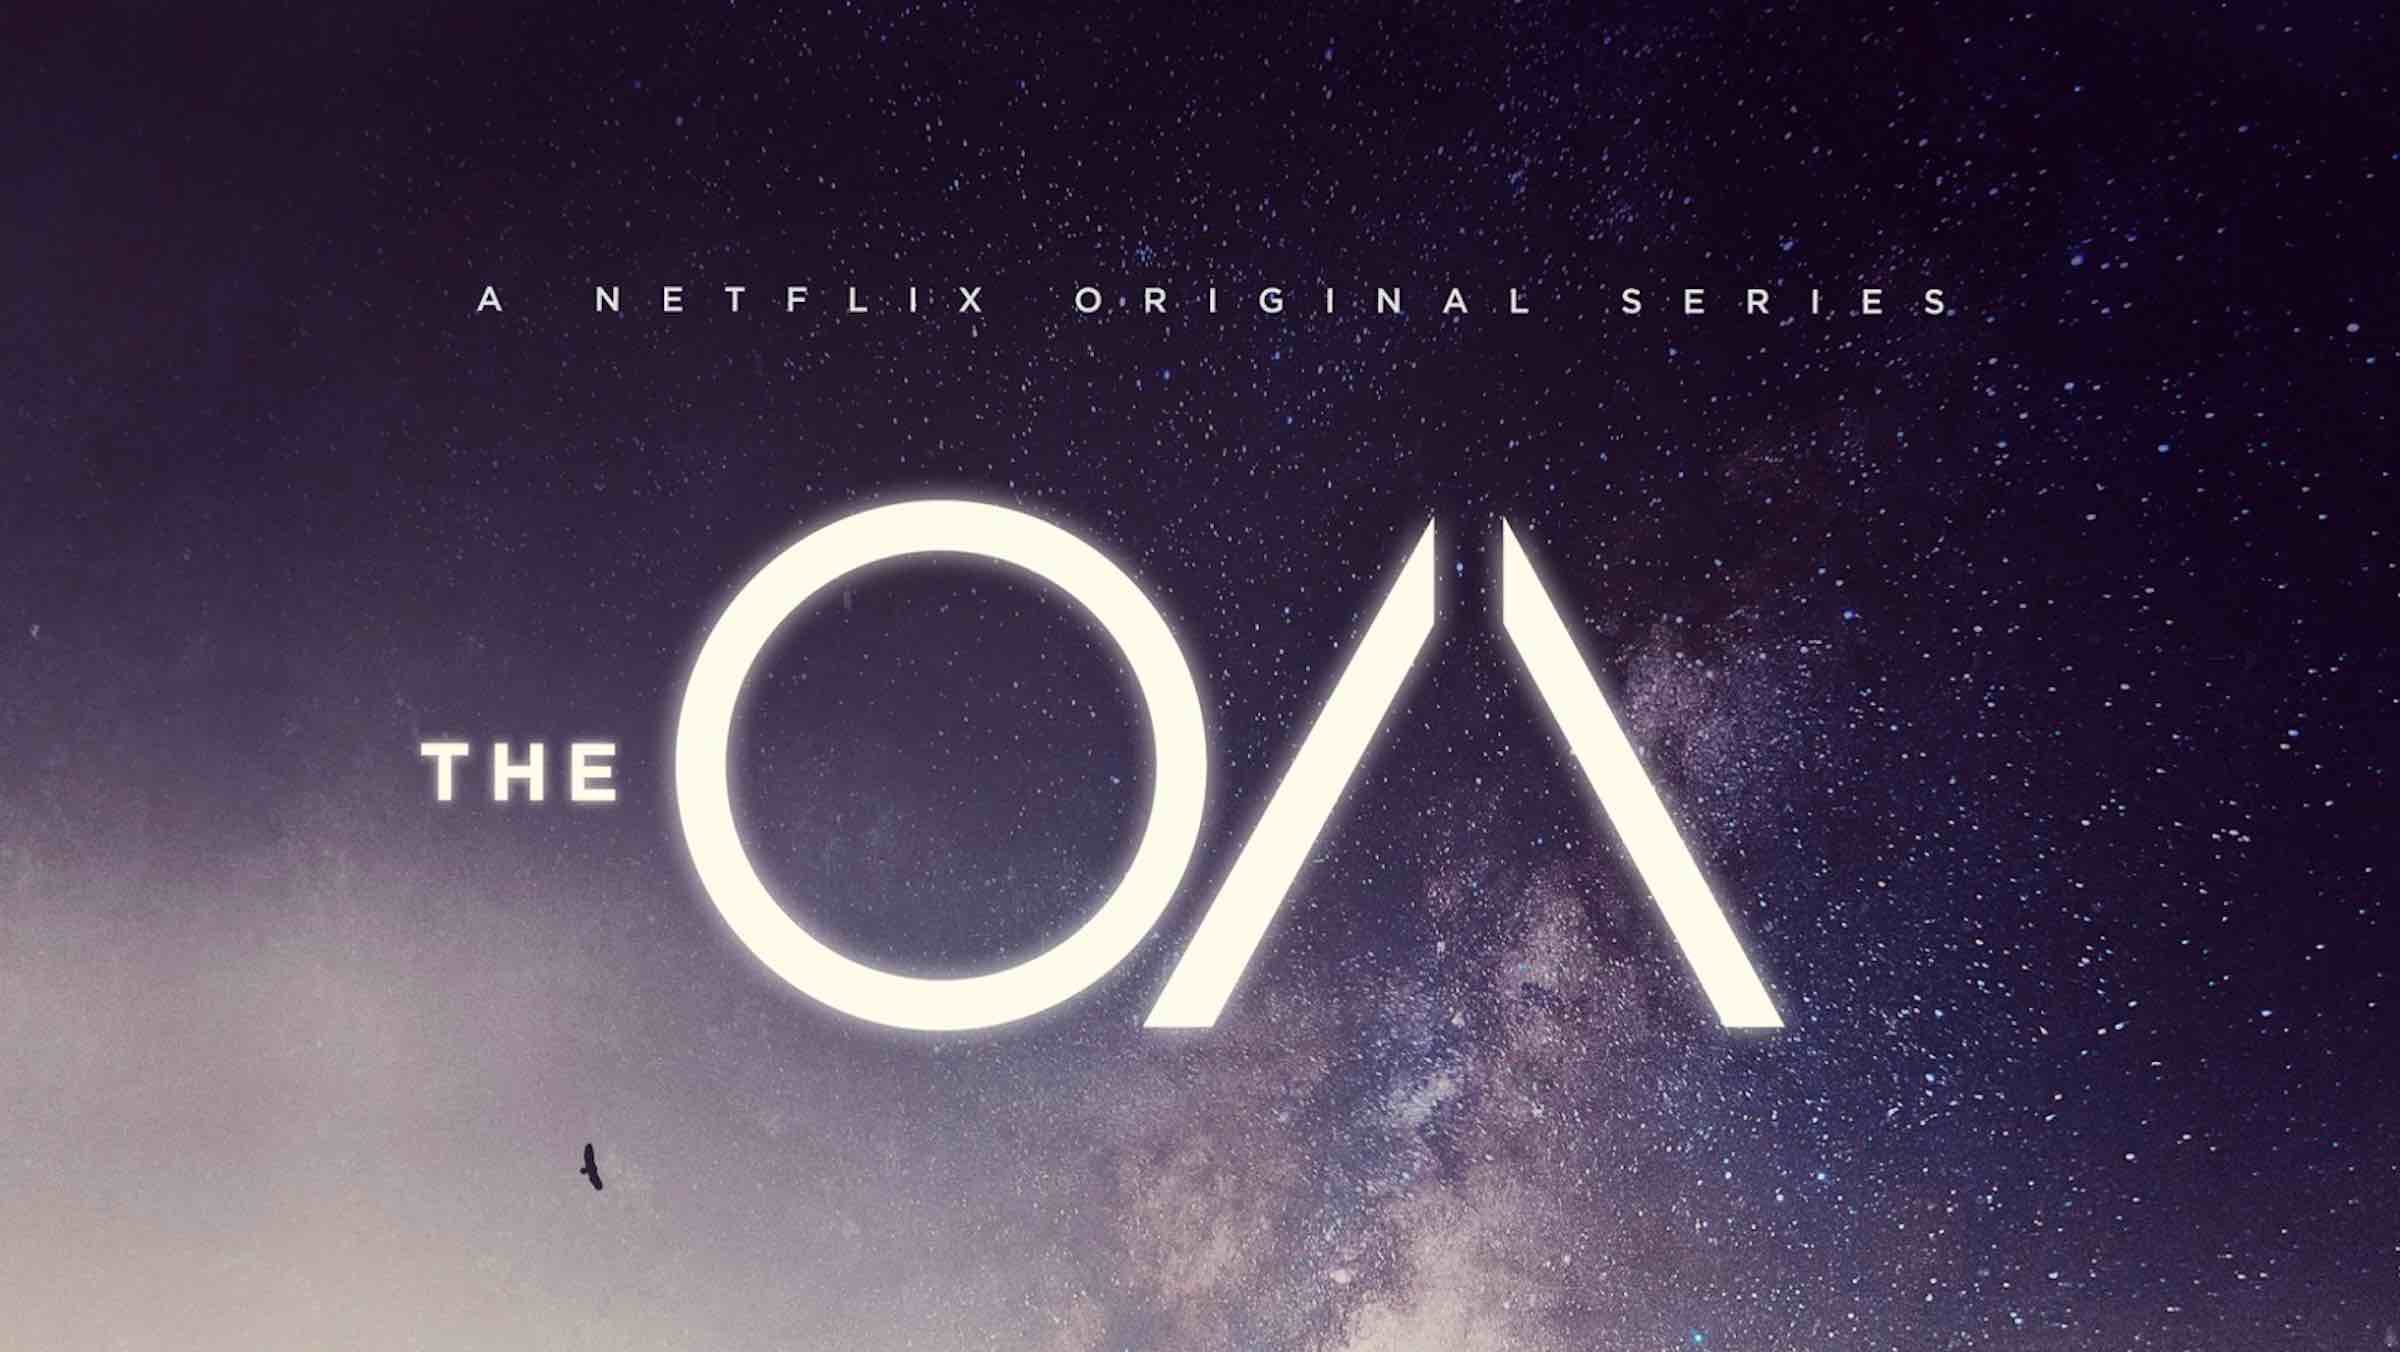 Brit Marling dazzled fans with her cult series ‘The OA’. Do you know enough about the show to ace our ‘OA’ quiz?